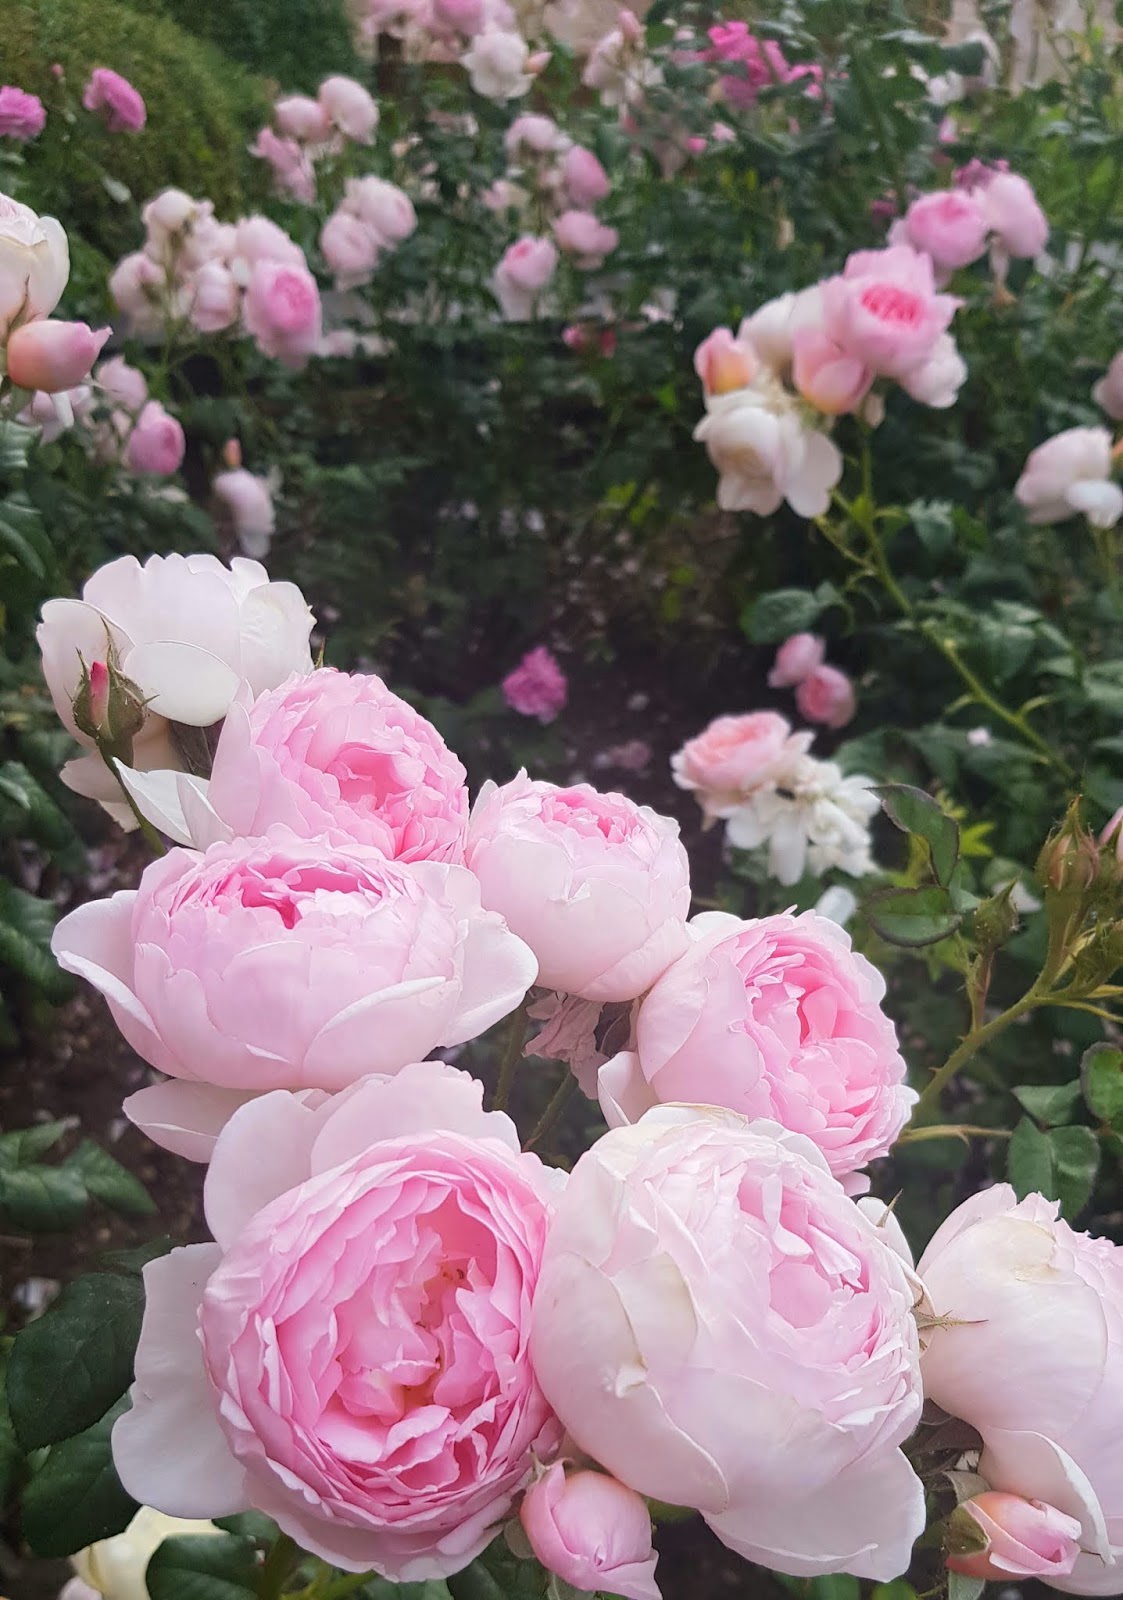 Davcid Austin English rose Scepter'd Isle in bloom in London, June 2020